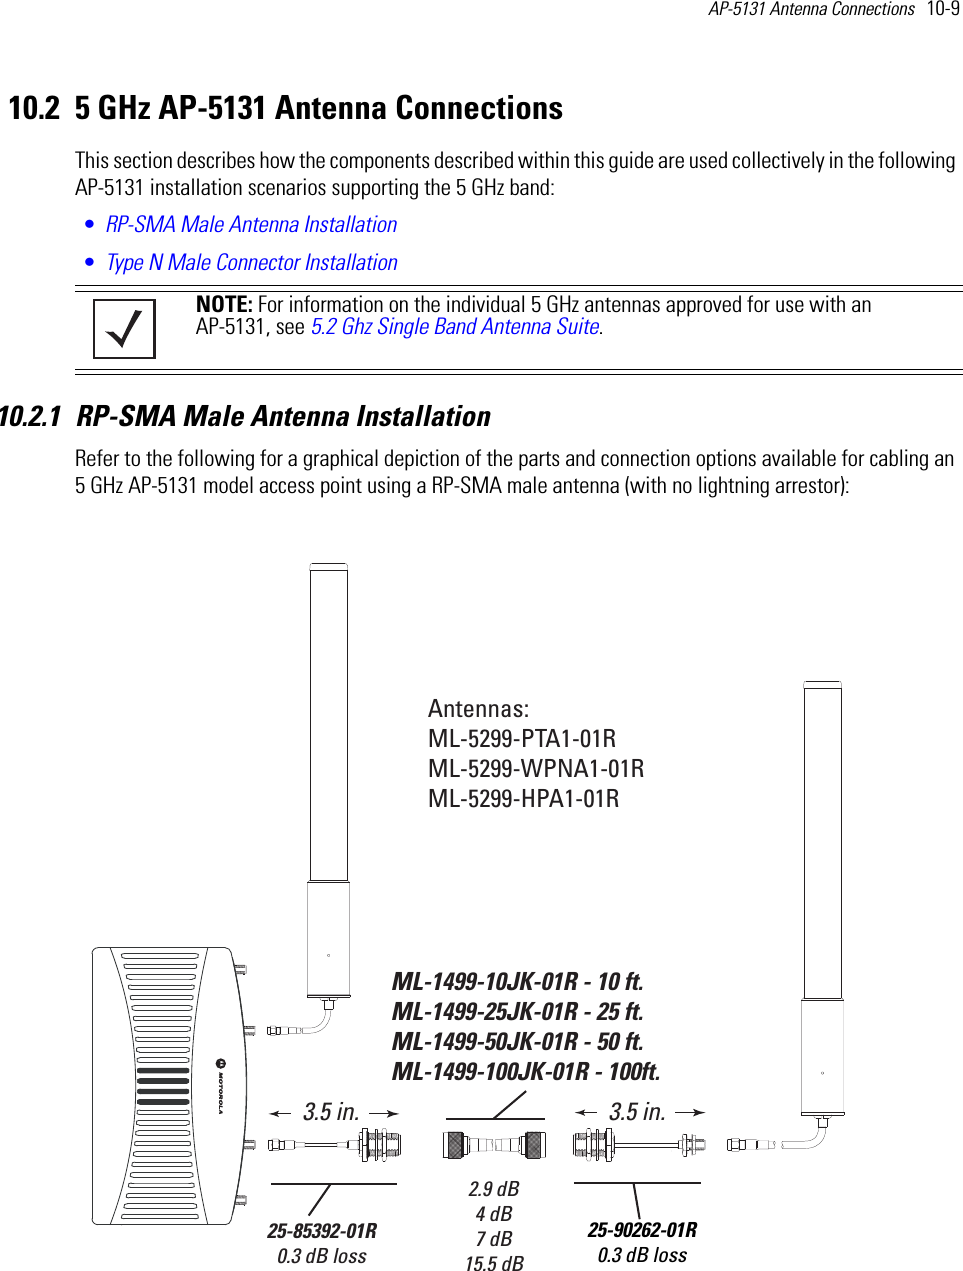 AP-5131 Antenna Connections   10-9 10.2 5 GHz AP-5131 Antenna ConnectionsThis section describes how the components described within this guide are used collectively in the following AP-5131 installation scenarios supporting the 5 GHz band:•RP-SMA Male Antenna Installation•Type N Male Connector Installation 10.2.1 RP-SMA Male Antenna Installation Refer to the following for a graphical depiction of the parts and connection options available for cabling an 5 GHz AP-5131 model access point using a RP-SMA male antenna (with no lightning arrestor): NOTE: For information on the individual 5 GHz antennas approved for use with an AP-5131, see 5.2 Ghz Single Band Antenna Suite.Antennas:ML-5299-PTA1-01RML-5299-WPNA1-01RML-5299-HPA1-01RML-1499-10JK-01R - 10 ft.ML-1499-25JK-01R - 25 ft.ML-1499-50JK-01R - 50 ft.ML-1499-100JK-01R - 100ft. 2.9 dB4 dB7 dB15.5 dB25-90262-01R0.3 dB loss3.5 in.25-85392-01R0.3 dB loss3.5 in.